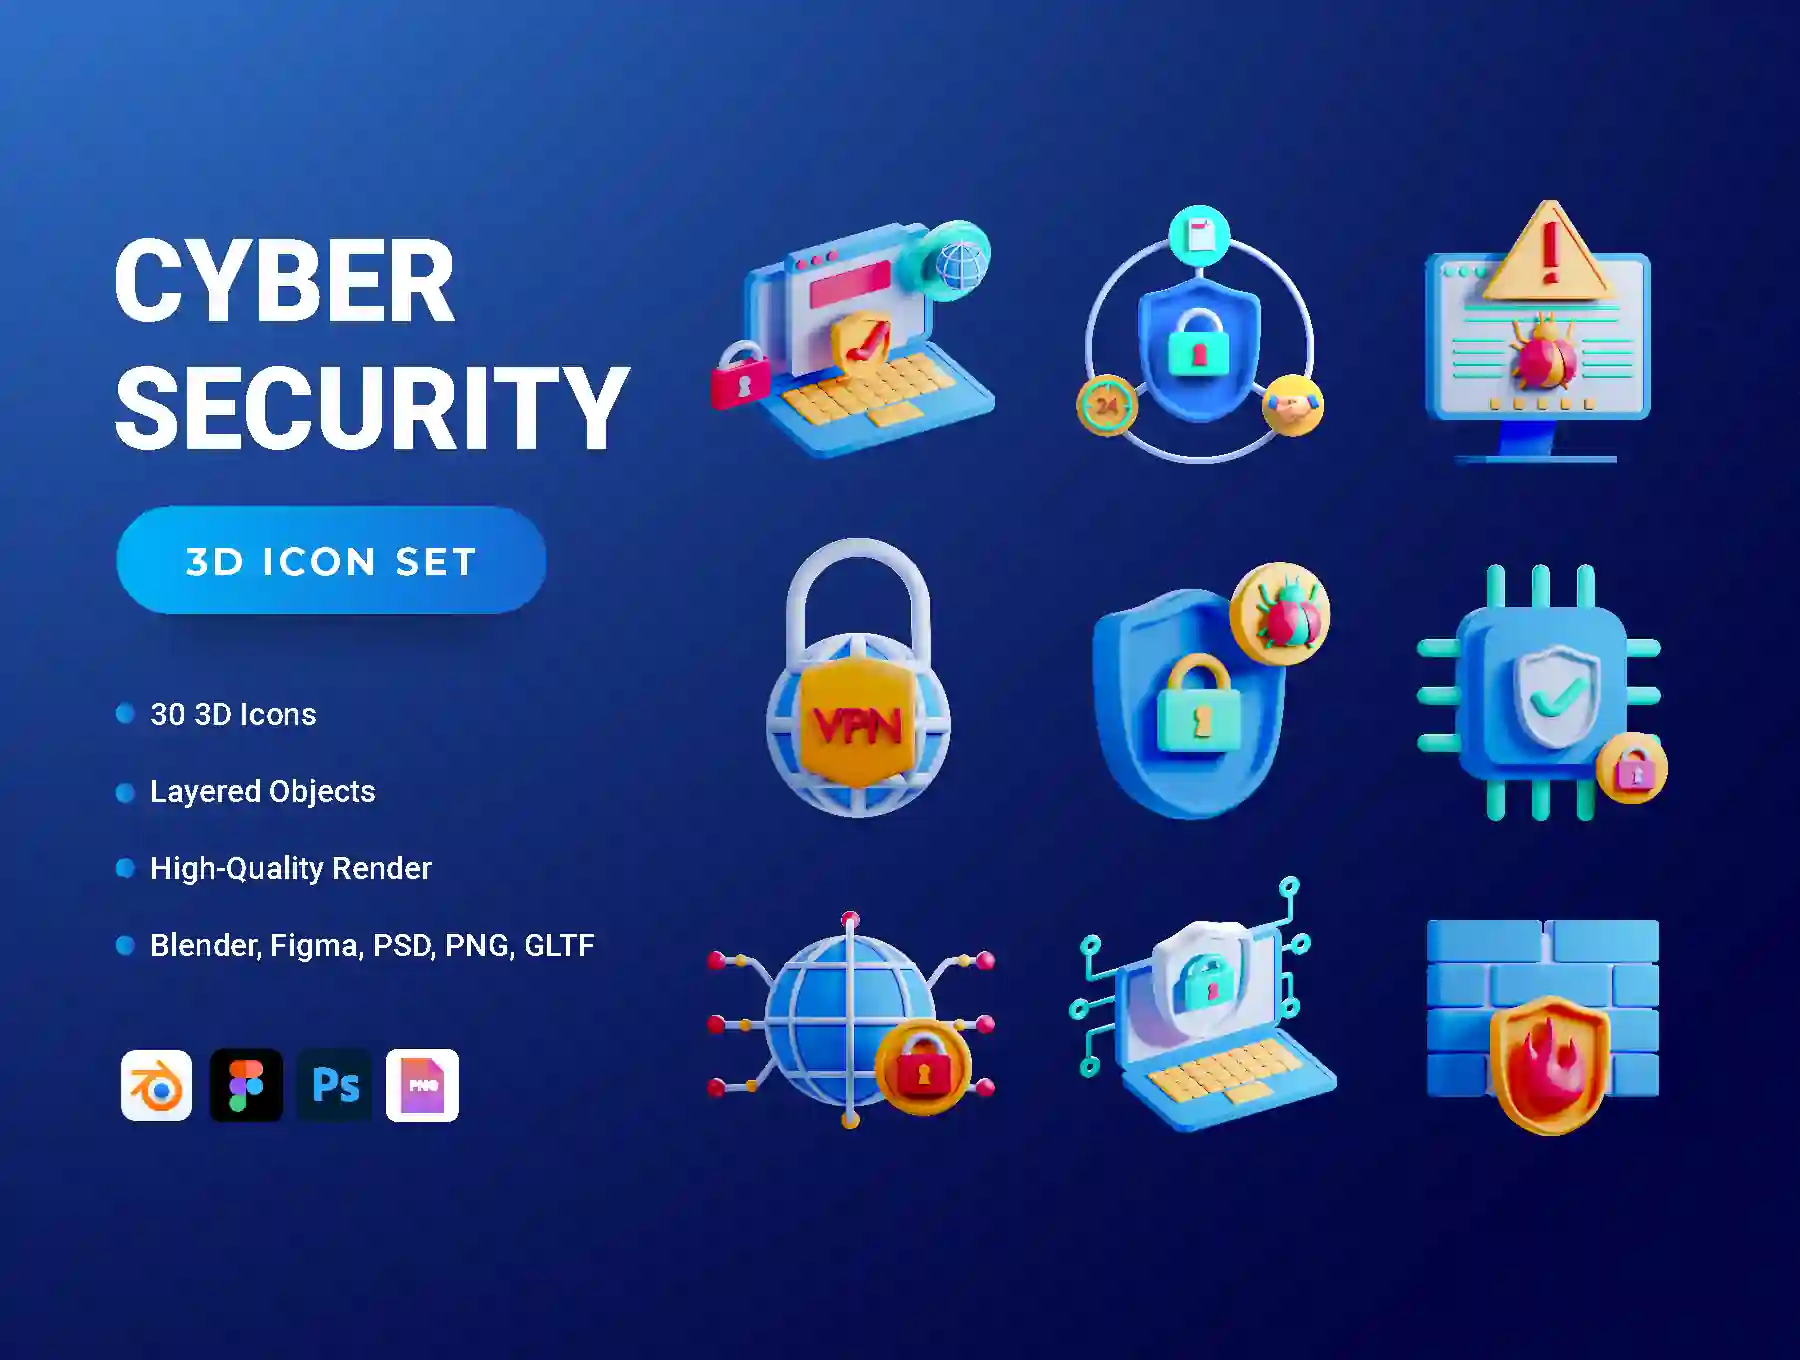 30 3D Cyber Security Icon Set